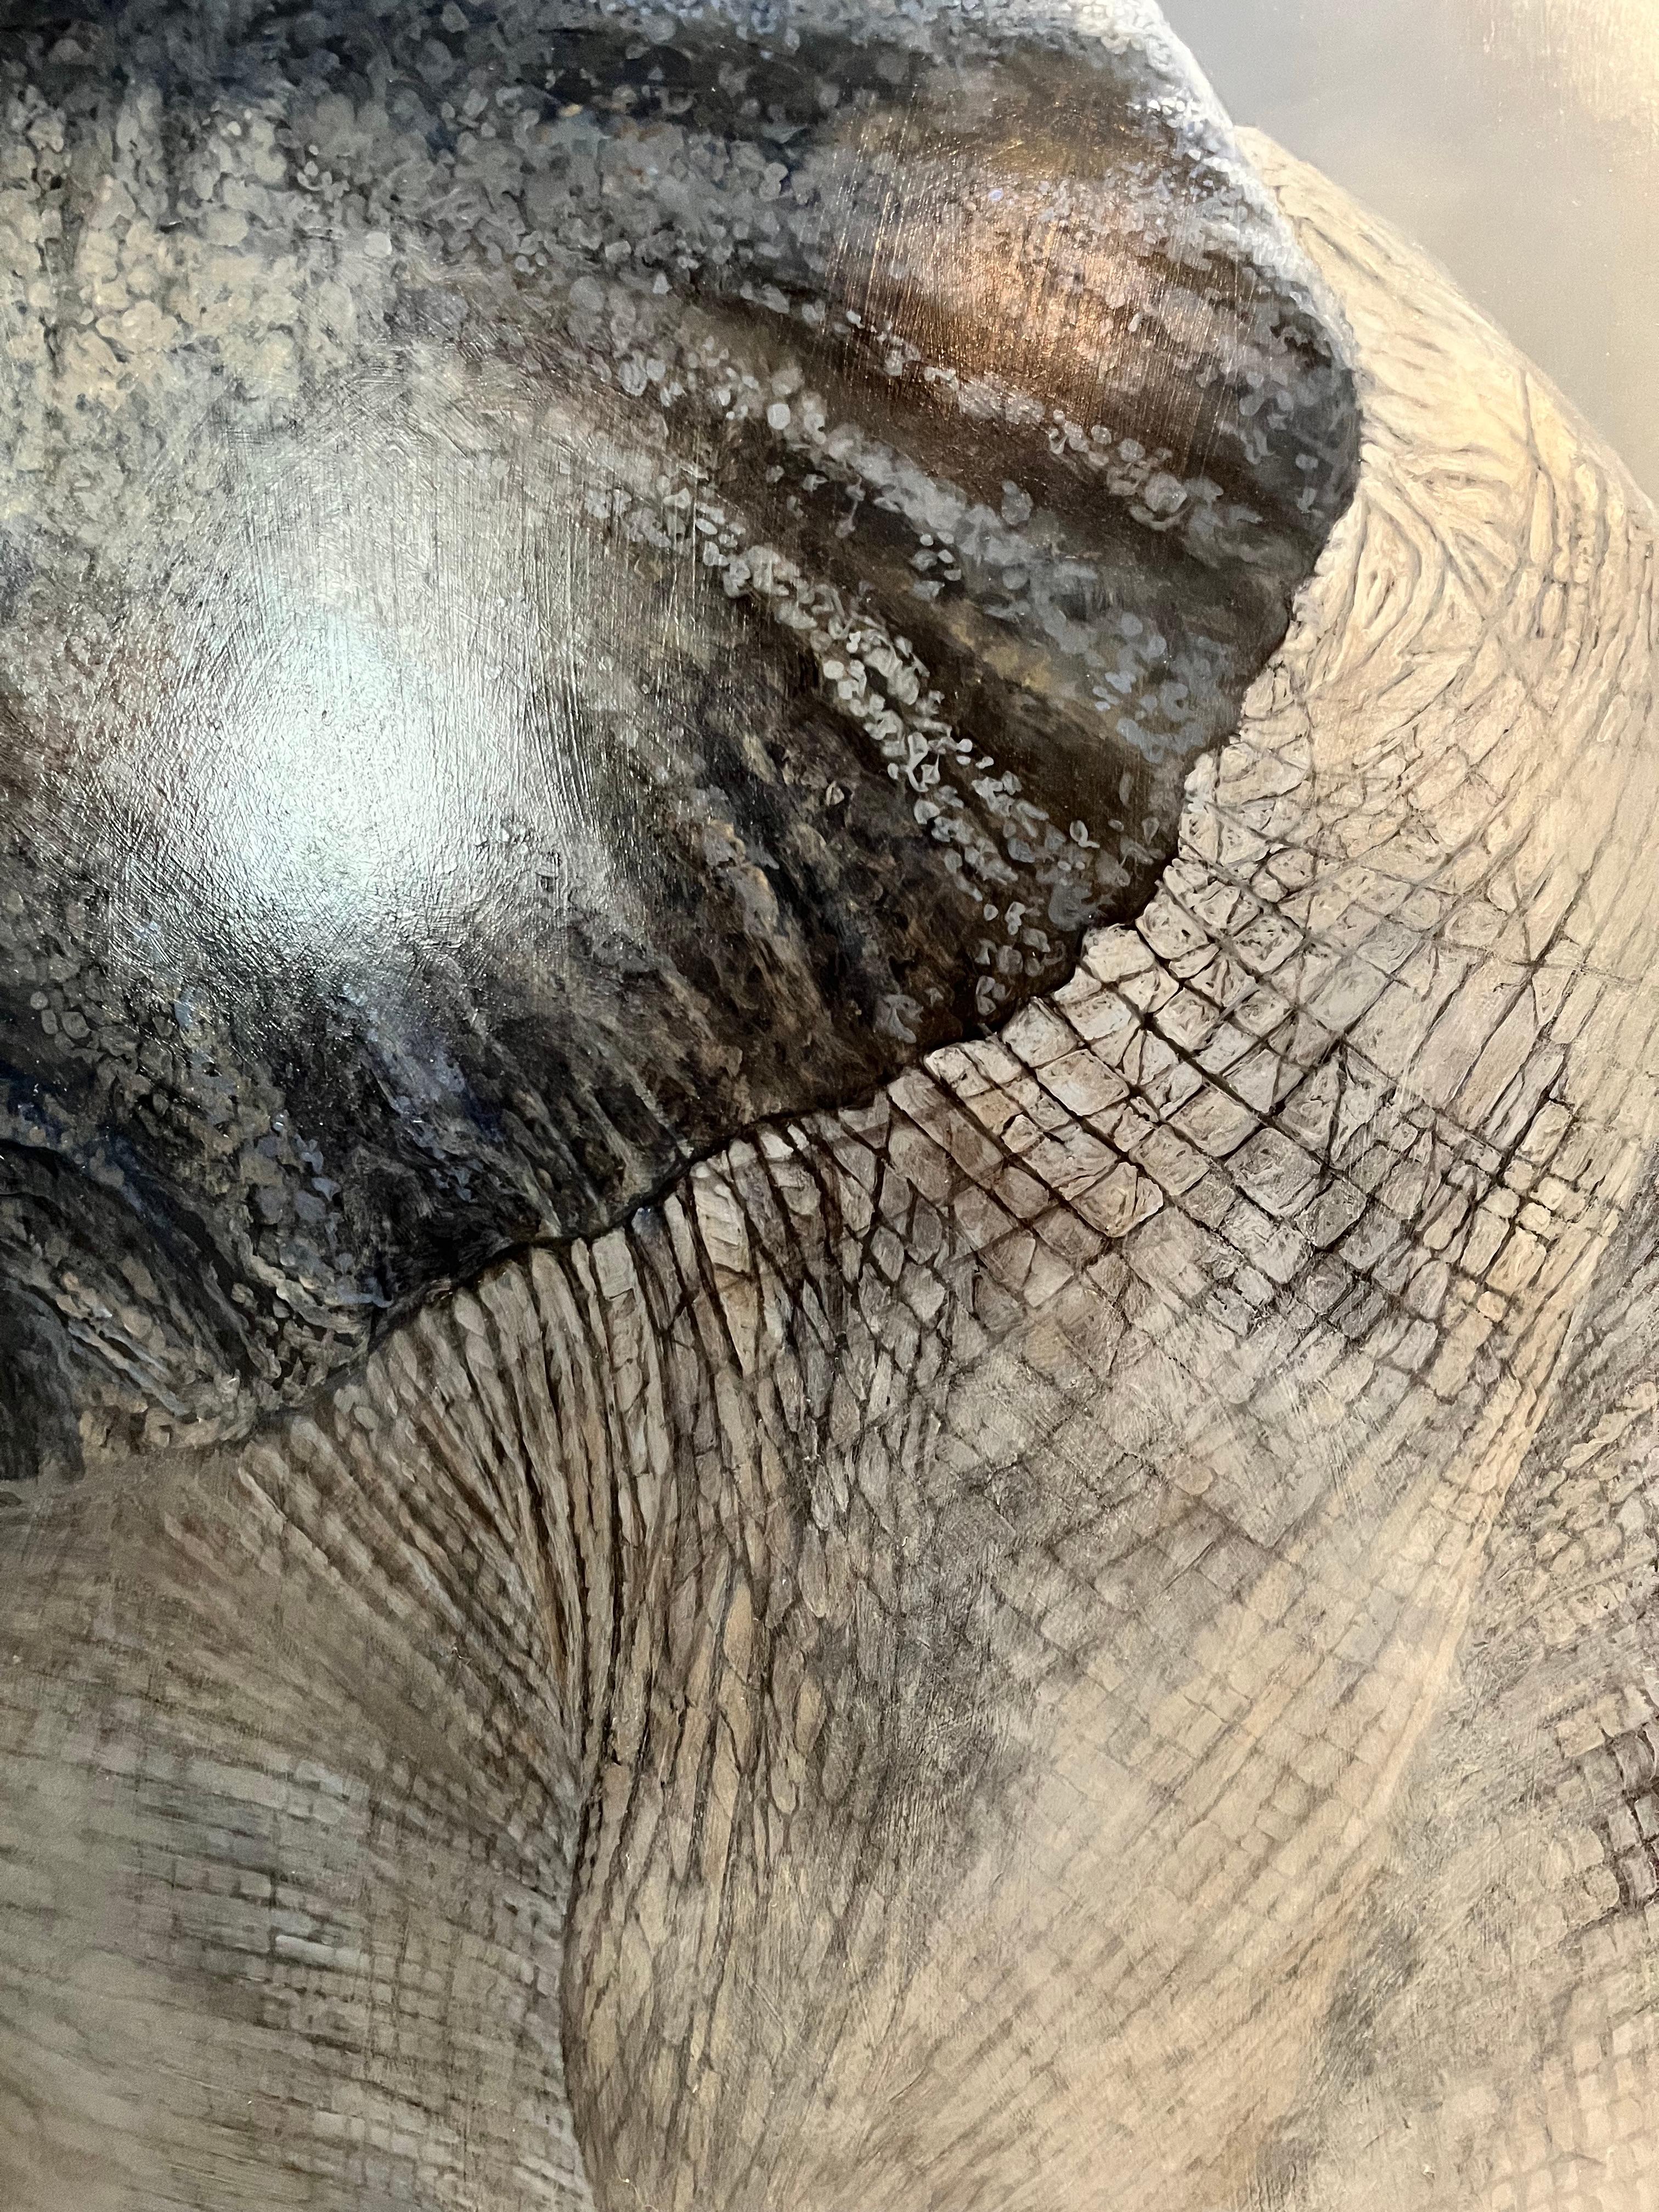 'The Challenge' by Ben Waddams is a Contemporary Realist Wildlife oil painting of an African Elephant.   With such incredible detail you can almost feel the leathery skin of the animal and hear the pounding feet as it charges. 

Ben Waddams is a